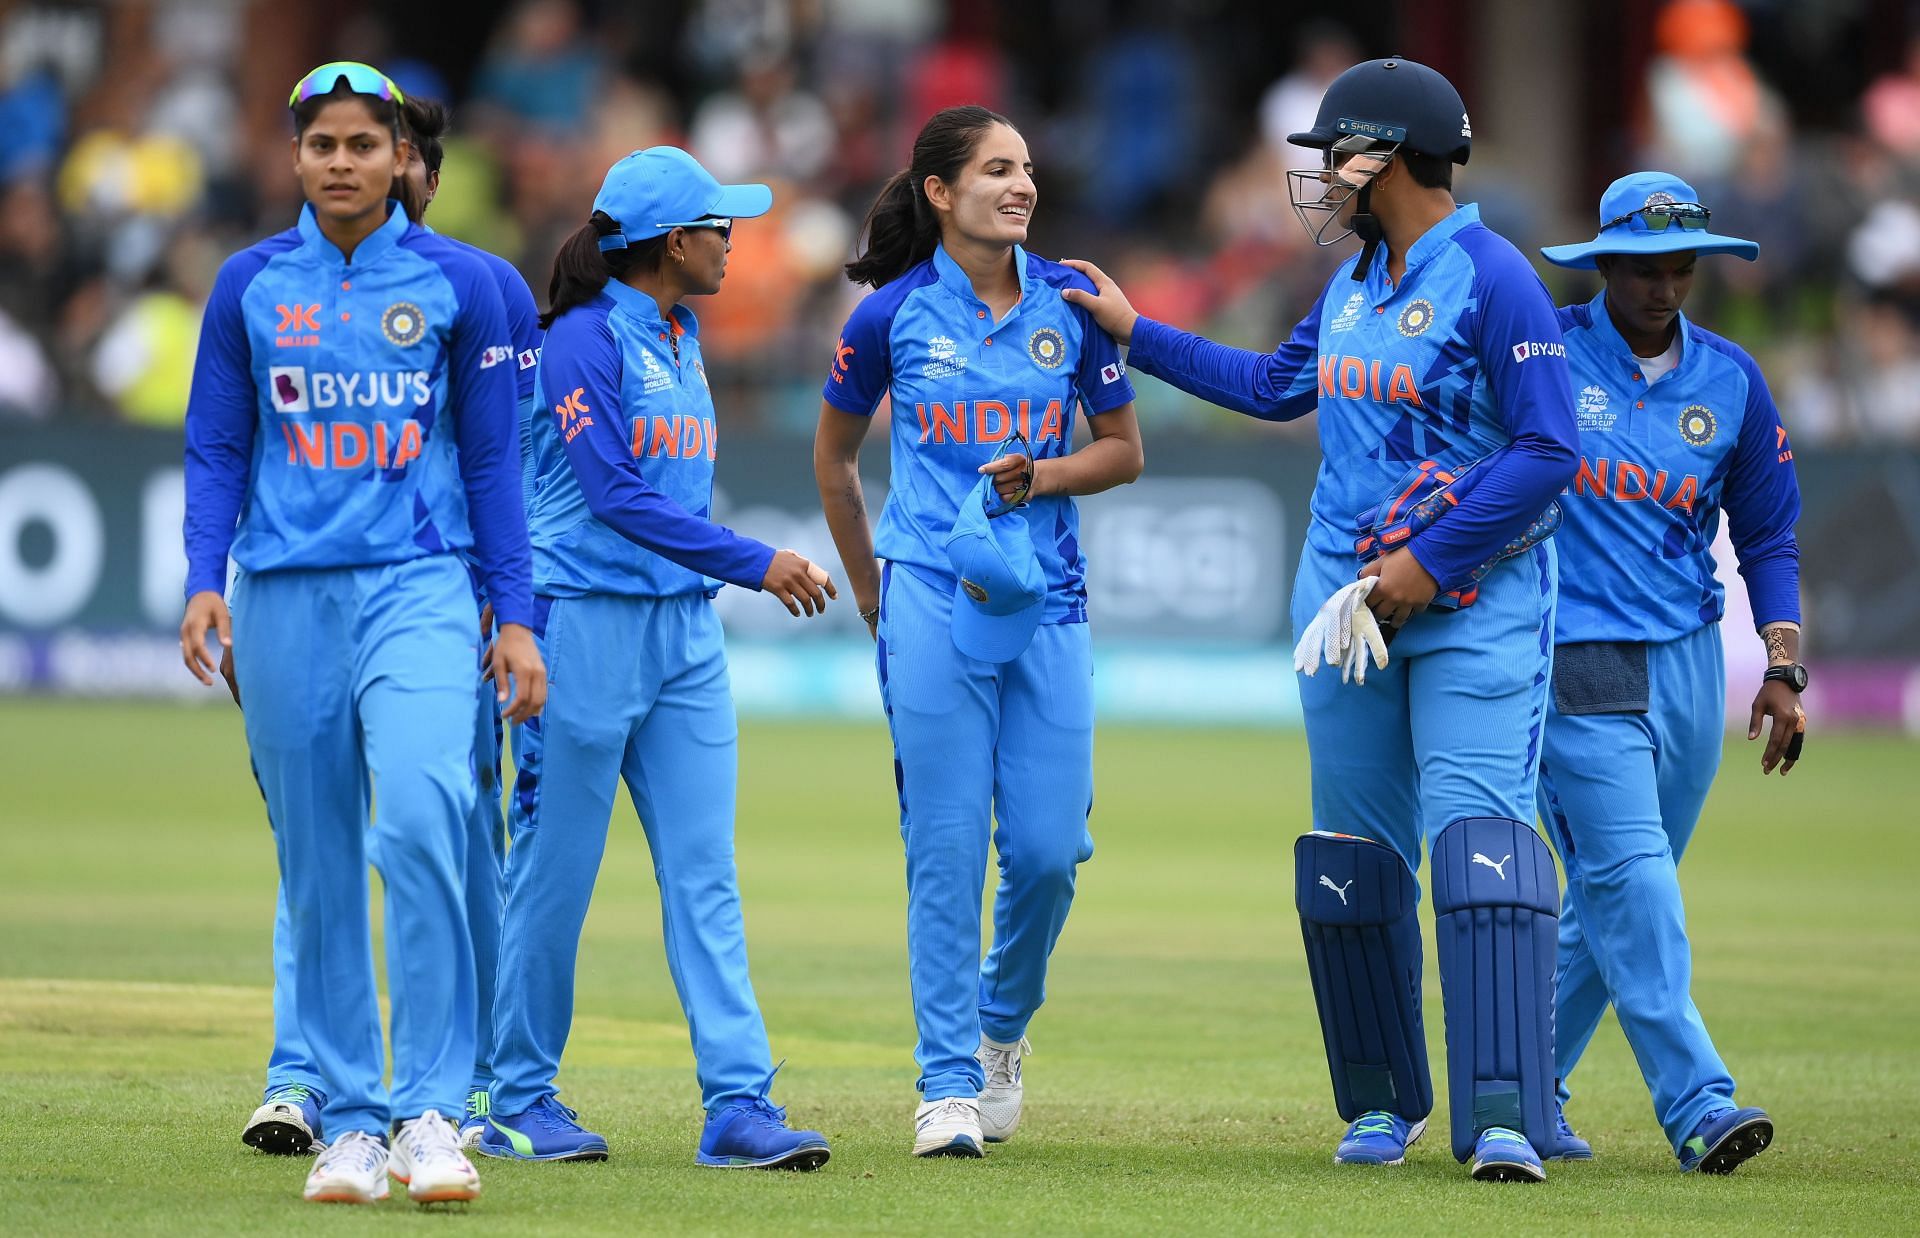 India vs Ireland, Women's T20 World Cup 2023: Probable XIs, pitch report, weather forecast, and live streaming details